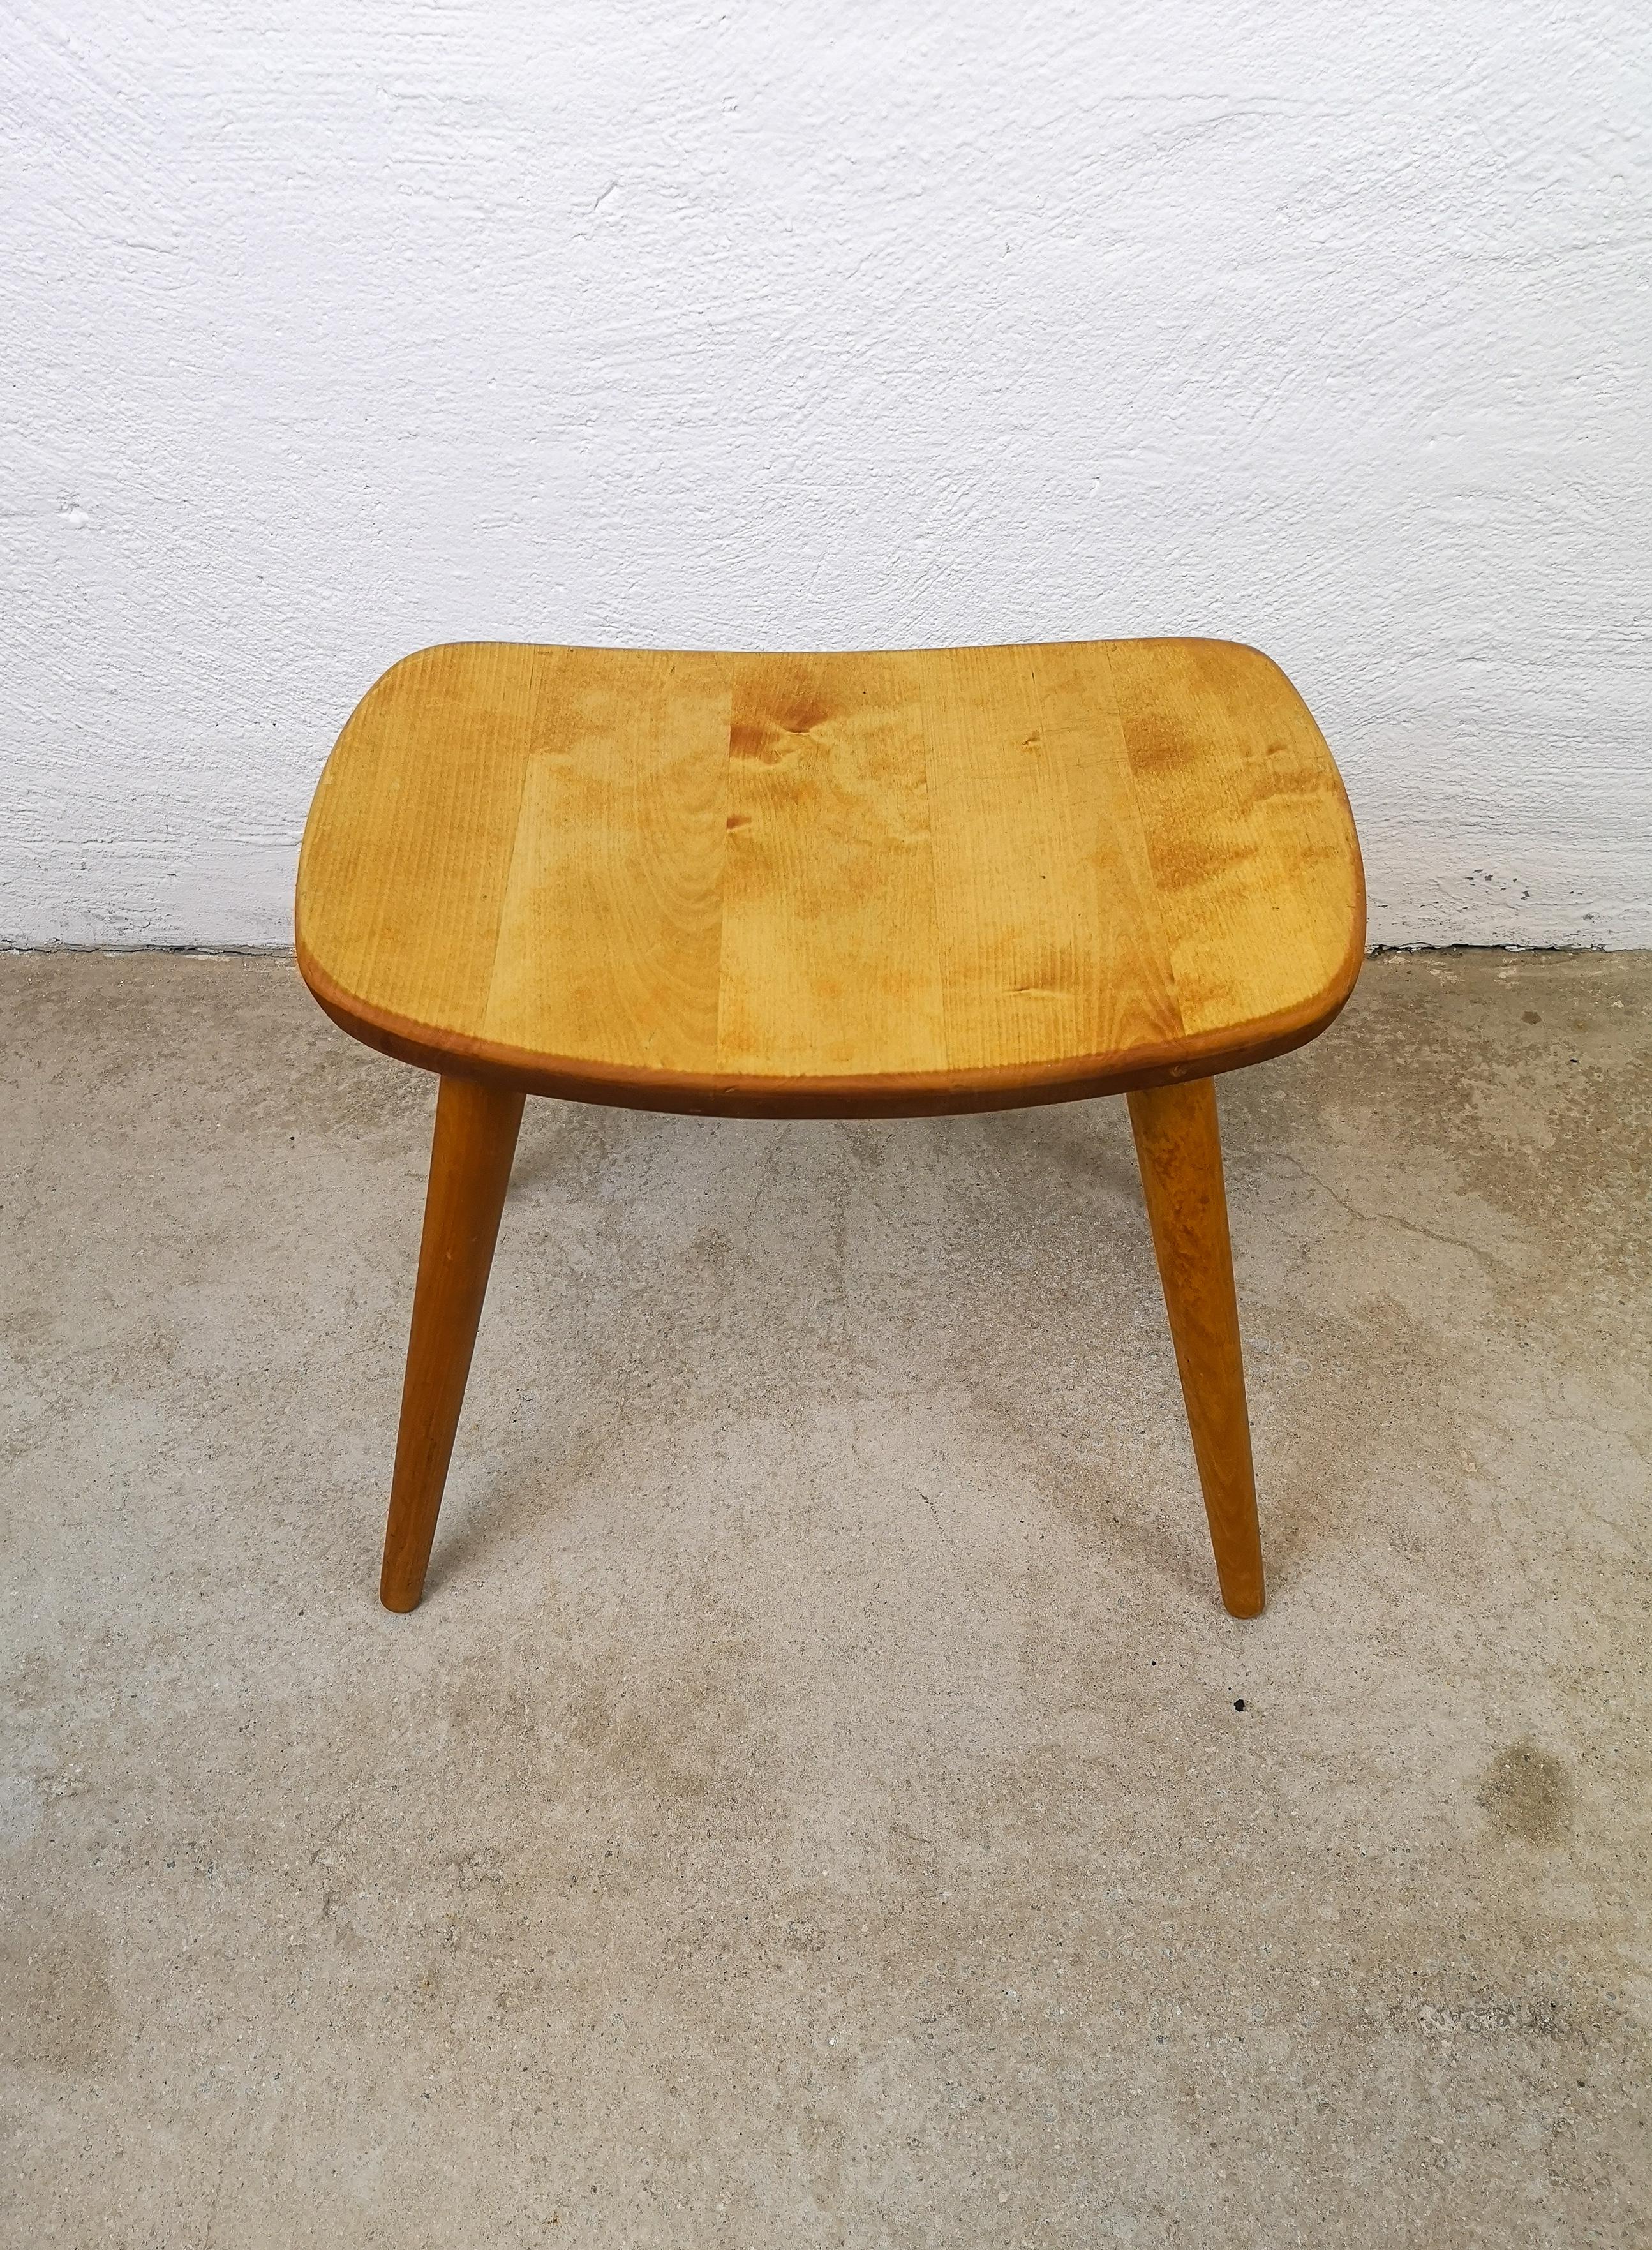 A stool in birch produced in Arvika, Sweden, 1940s manufactured by Frimans Furniture.
This stool is a good example of the good craftsmanship and minimalistic stile to come in Scandinavian furniture. 

Very good original condition with a beautiful